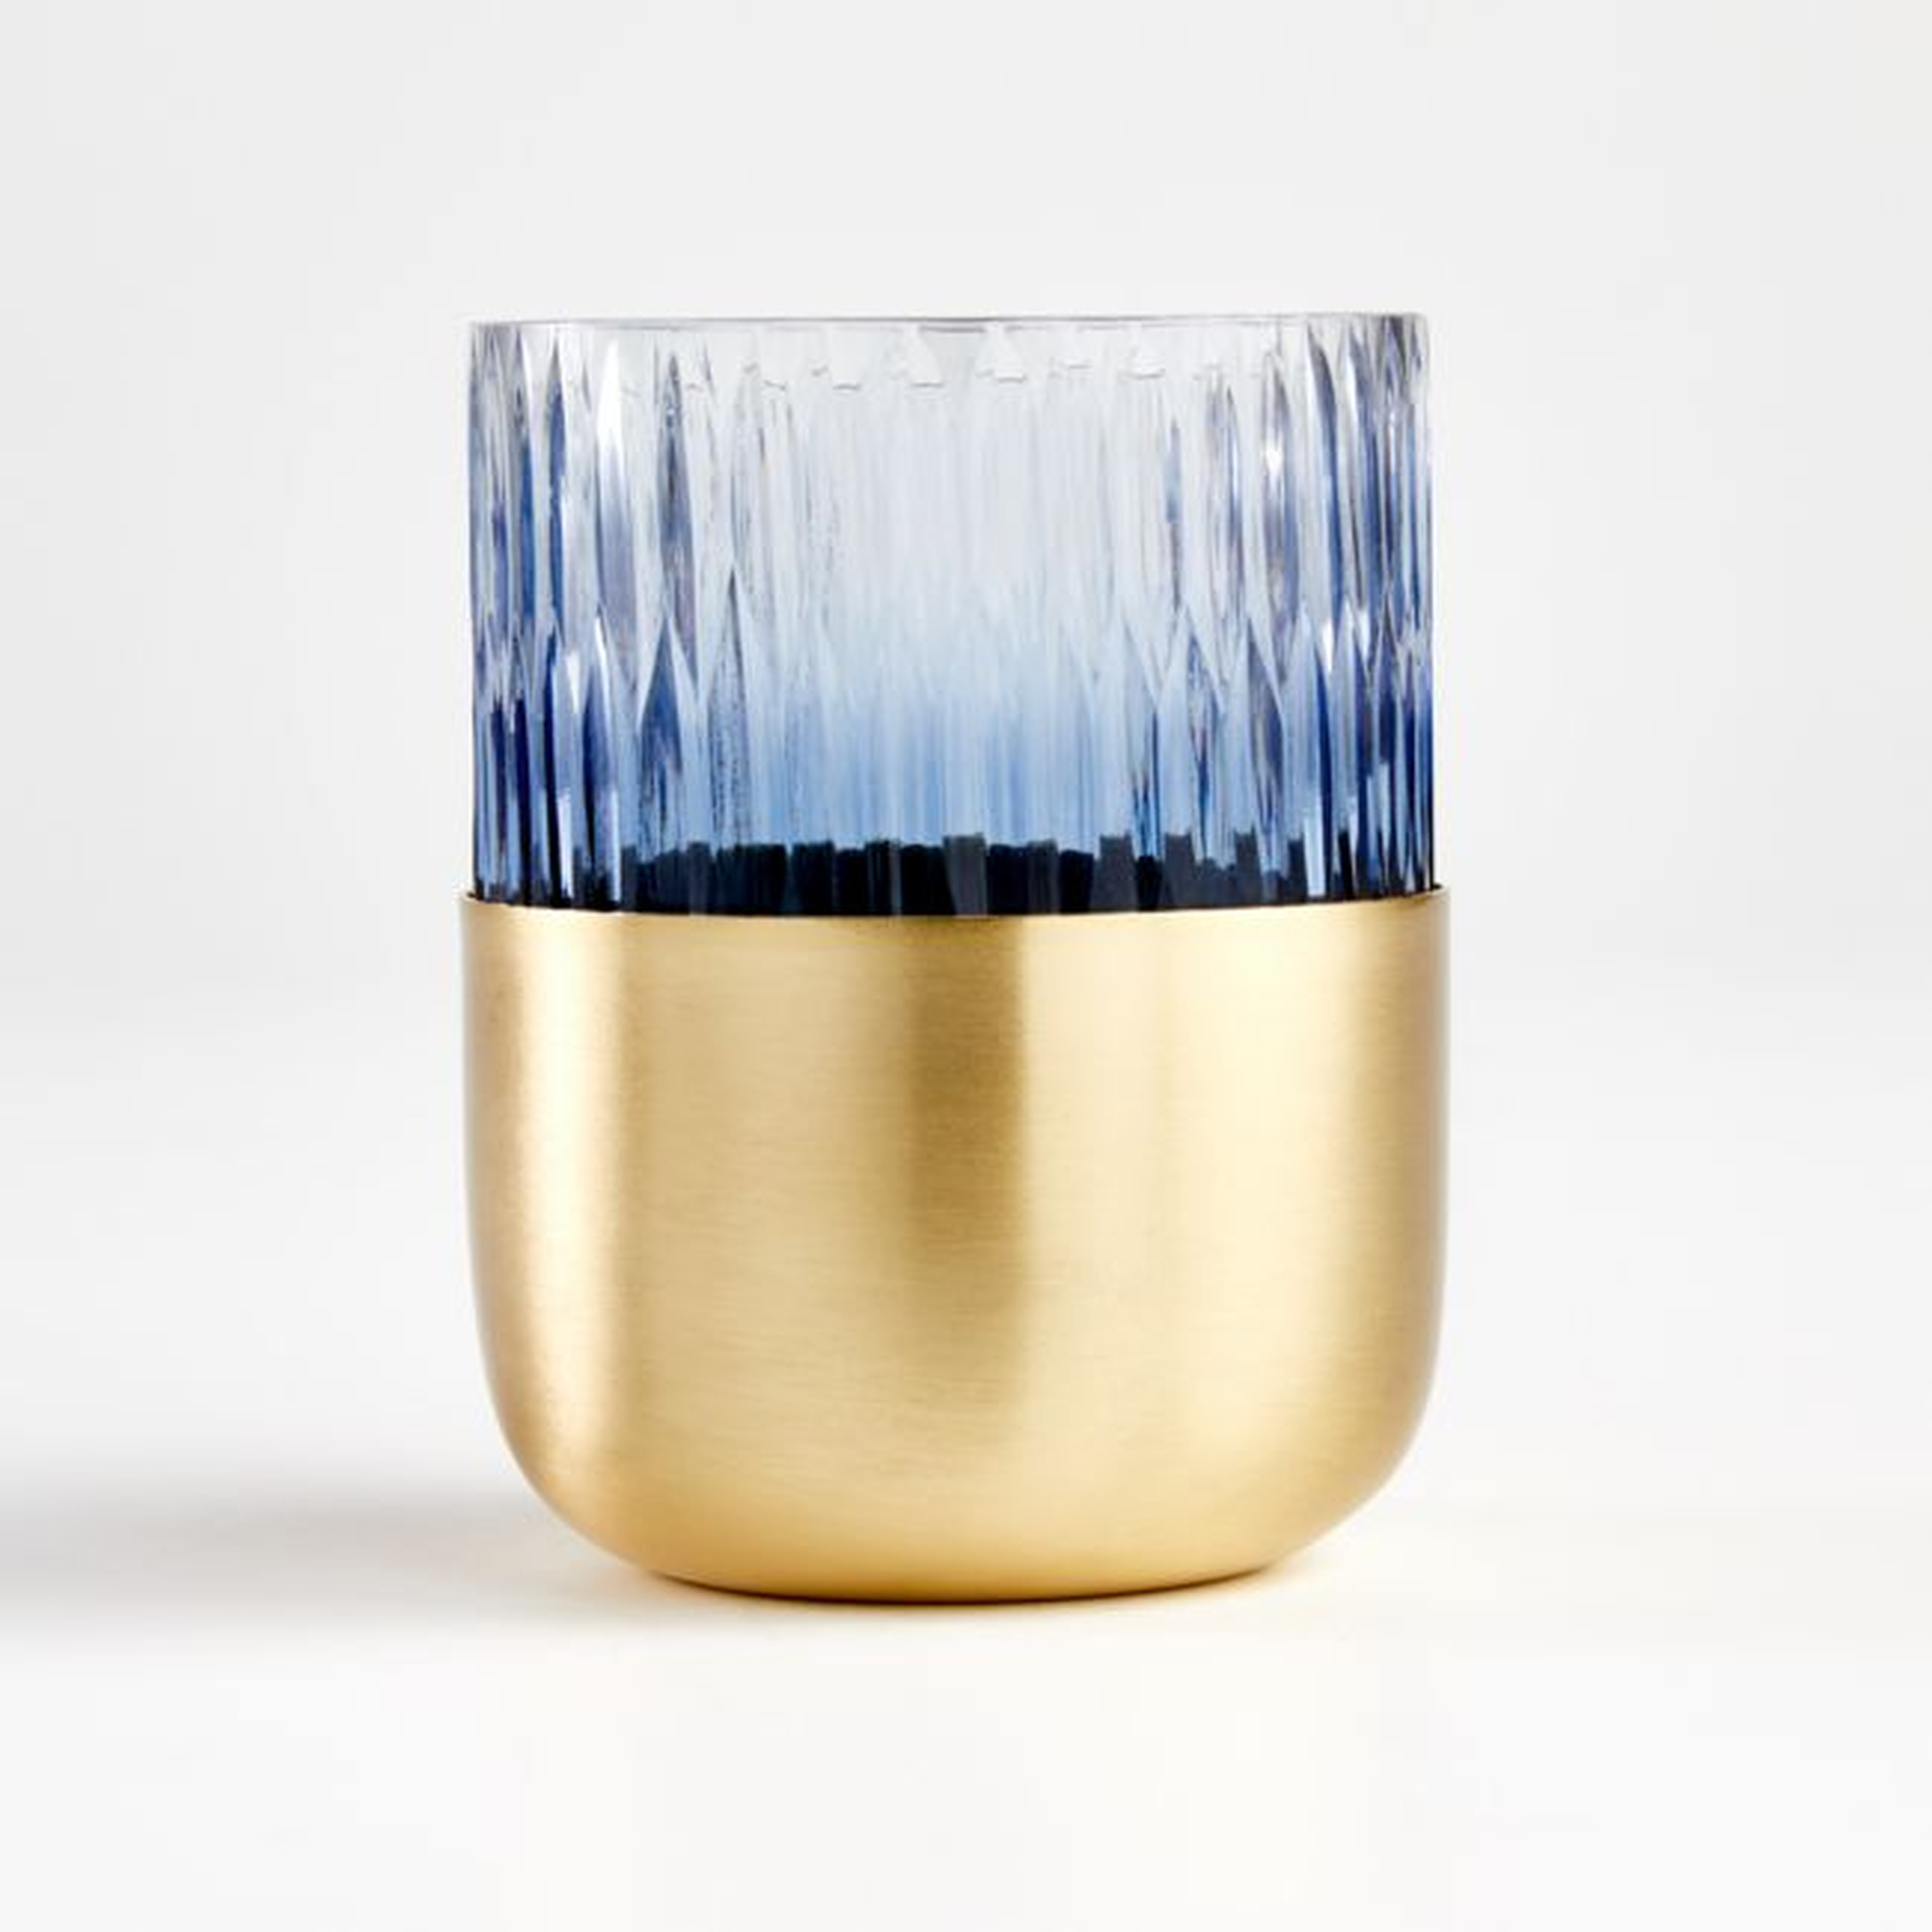 Virtuoso Blue Tealight Holder with Gold Metal - Crate and Barrel